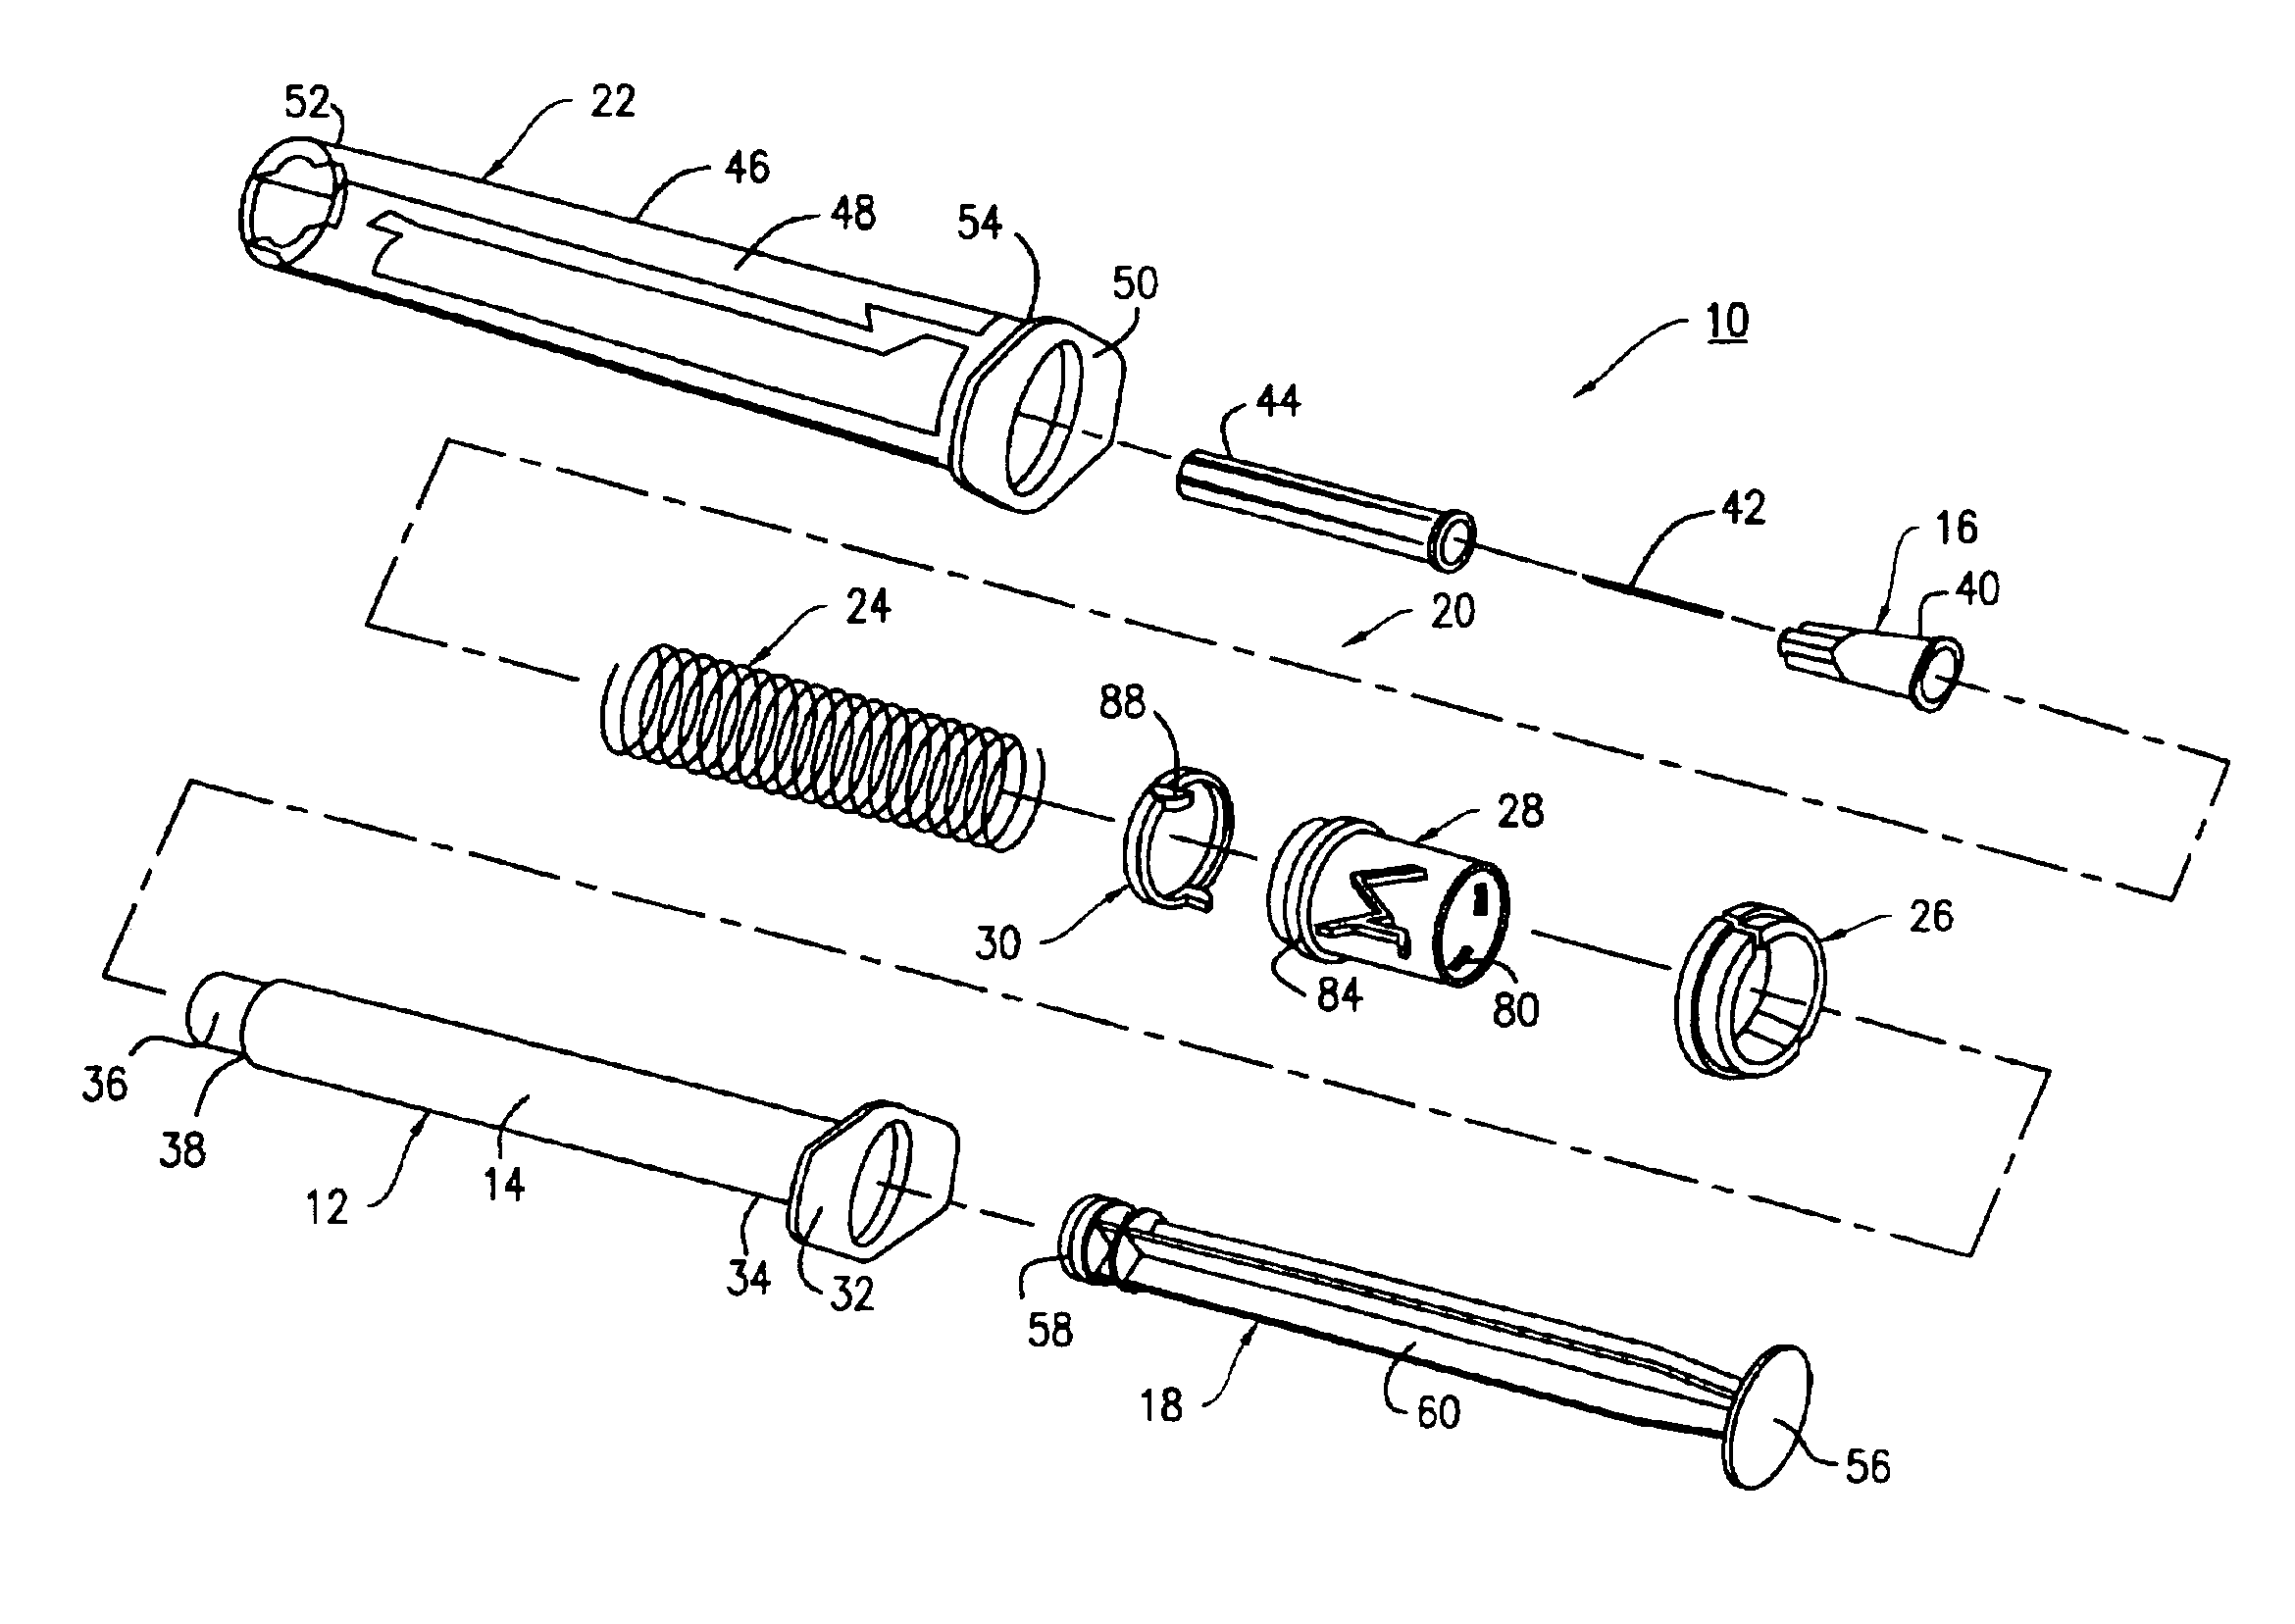 Adaptor for converting a non-safety syringe into a safety syringe